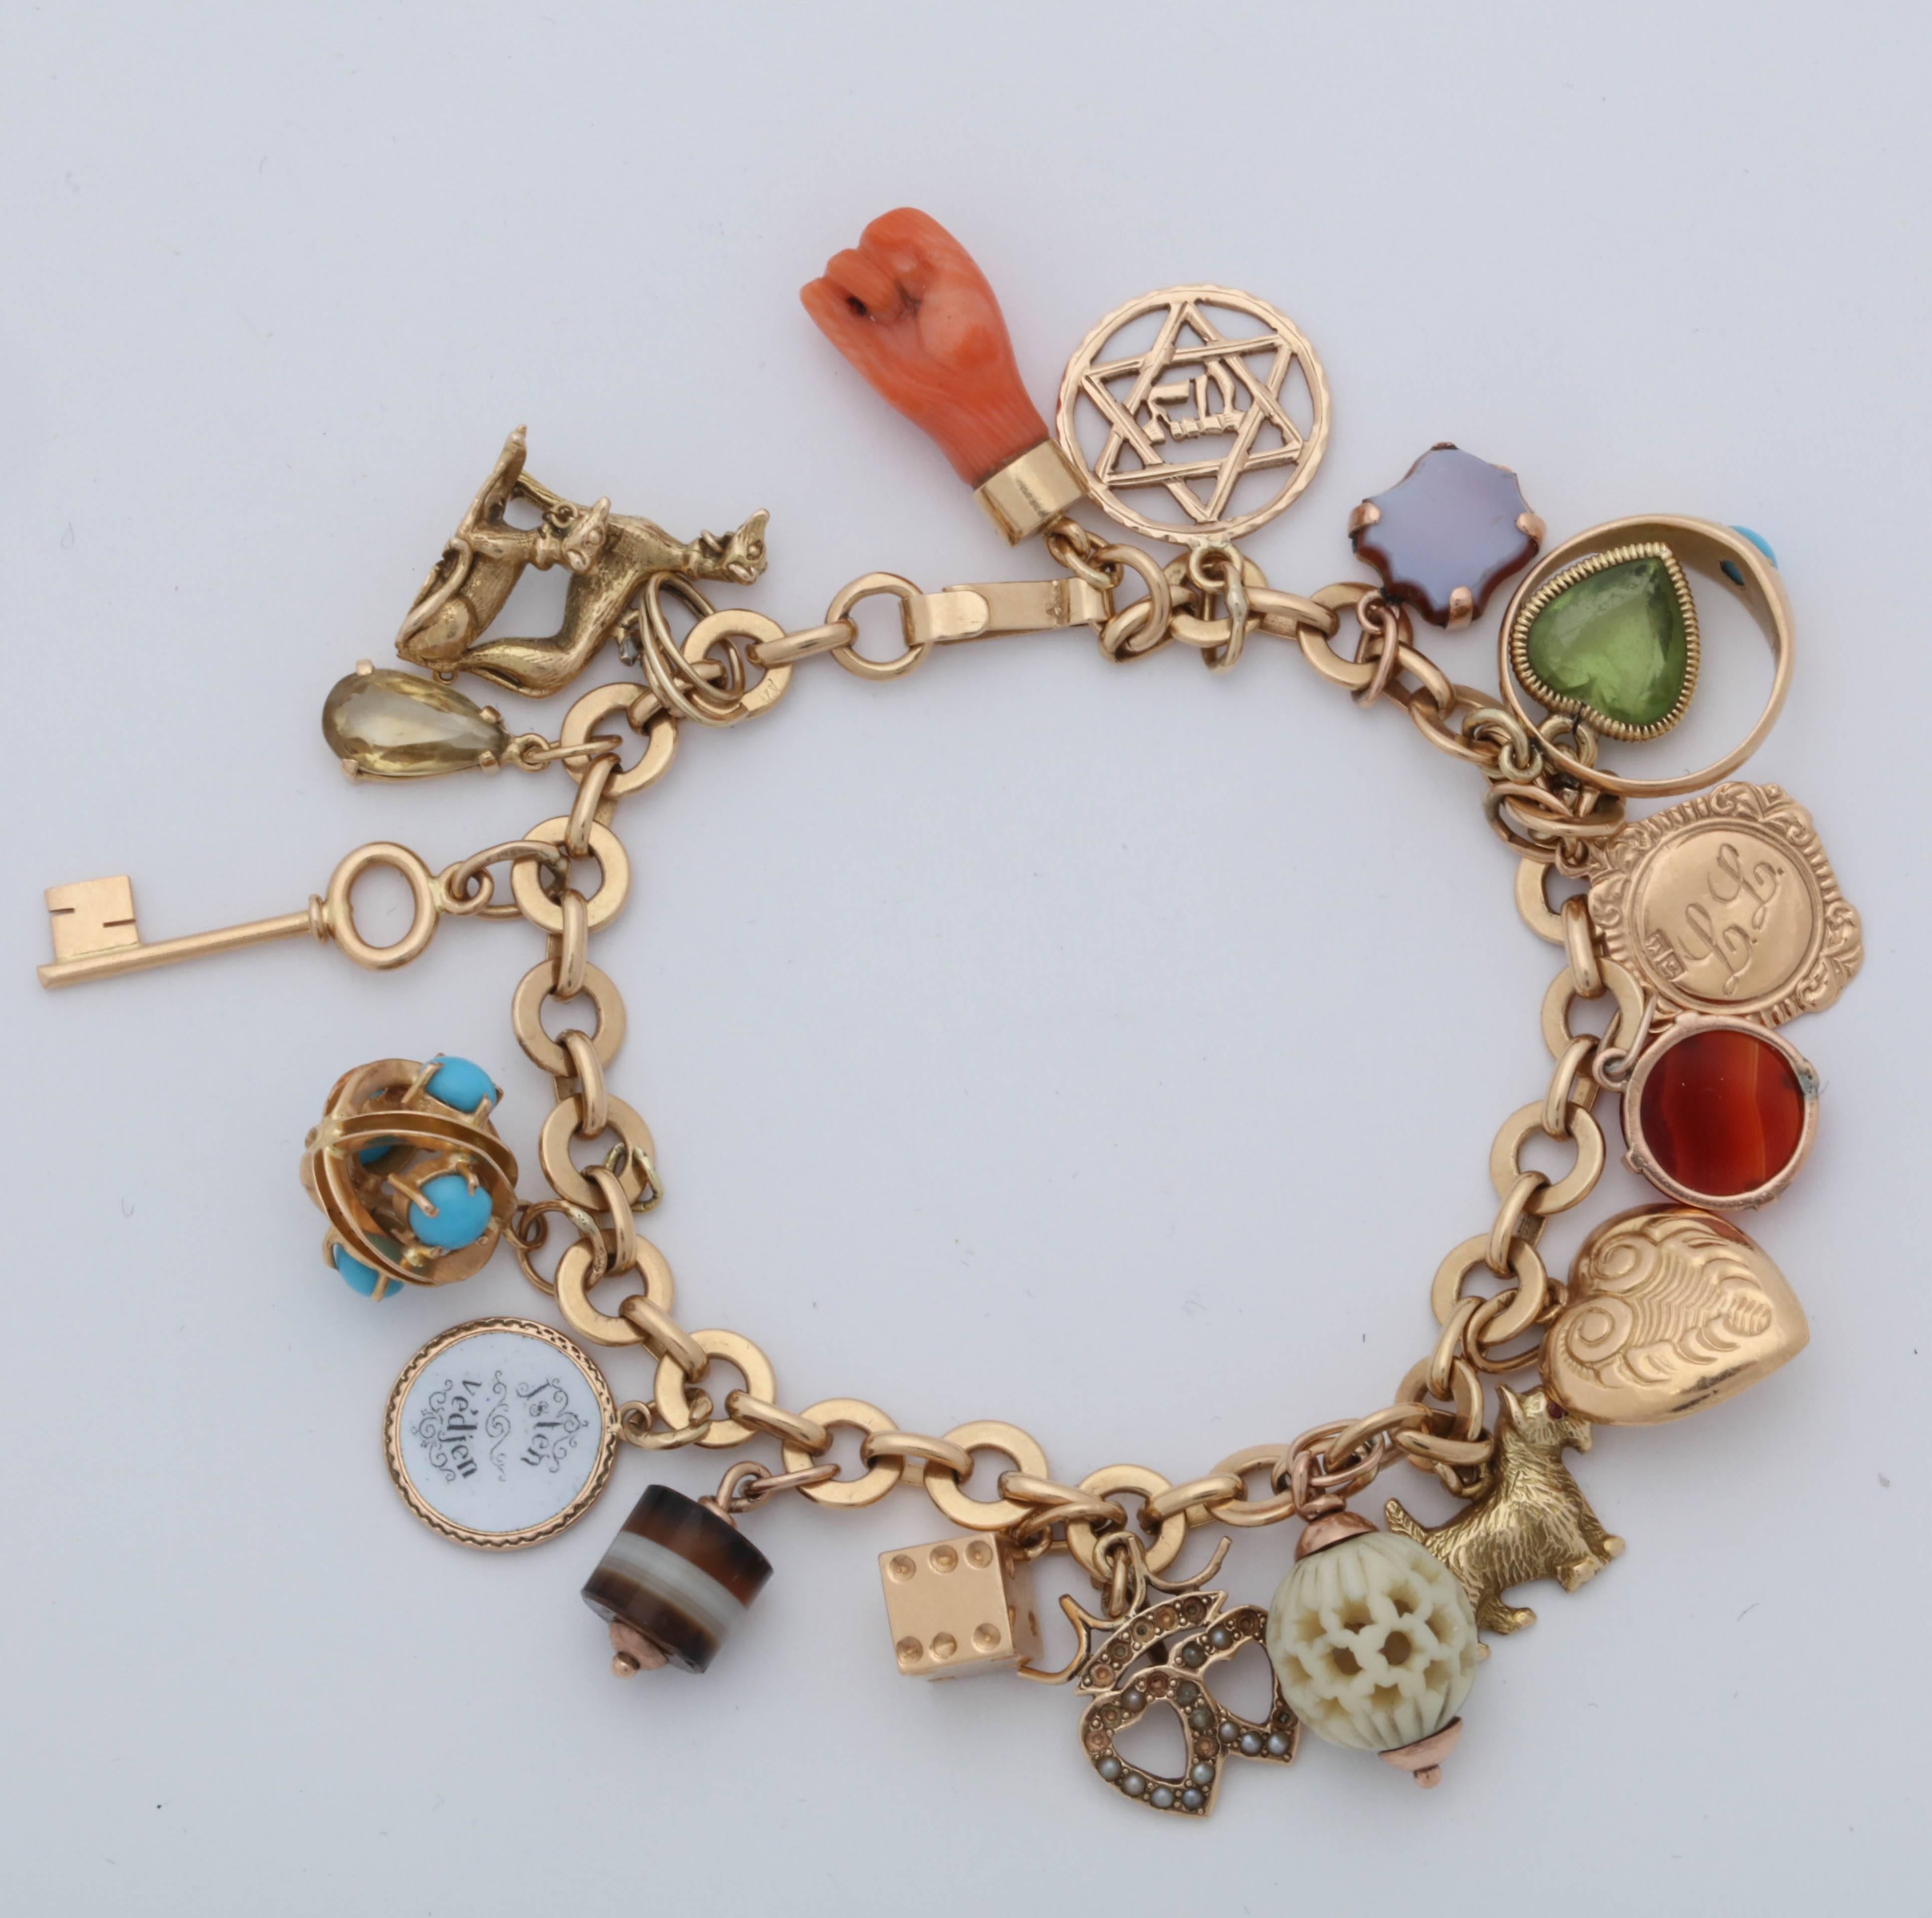 One Ladies 14kt Gold Chain Link Bracelet Designed With Twenty Darling Small Charms. Several Jewel Encrusted Heart Charms, Gold Doggie Charms,One Lucky Carved Coral Hand Charm. Two Jewel Encrusted Sphere Charms And A Lucky Roll of The Dice Charm And